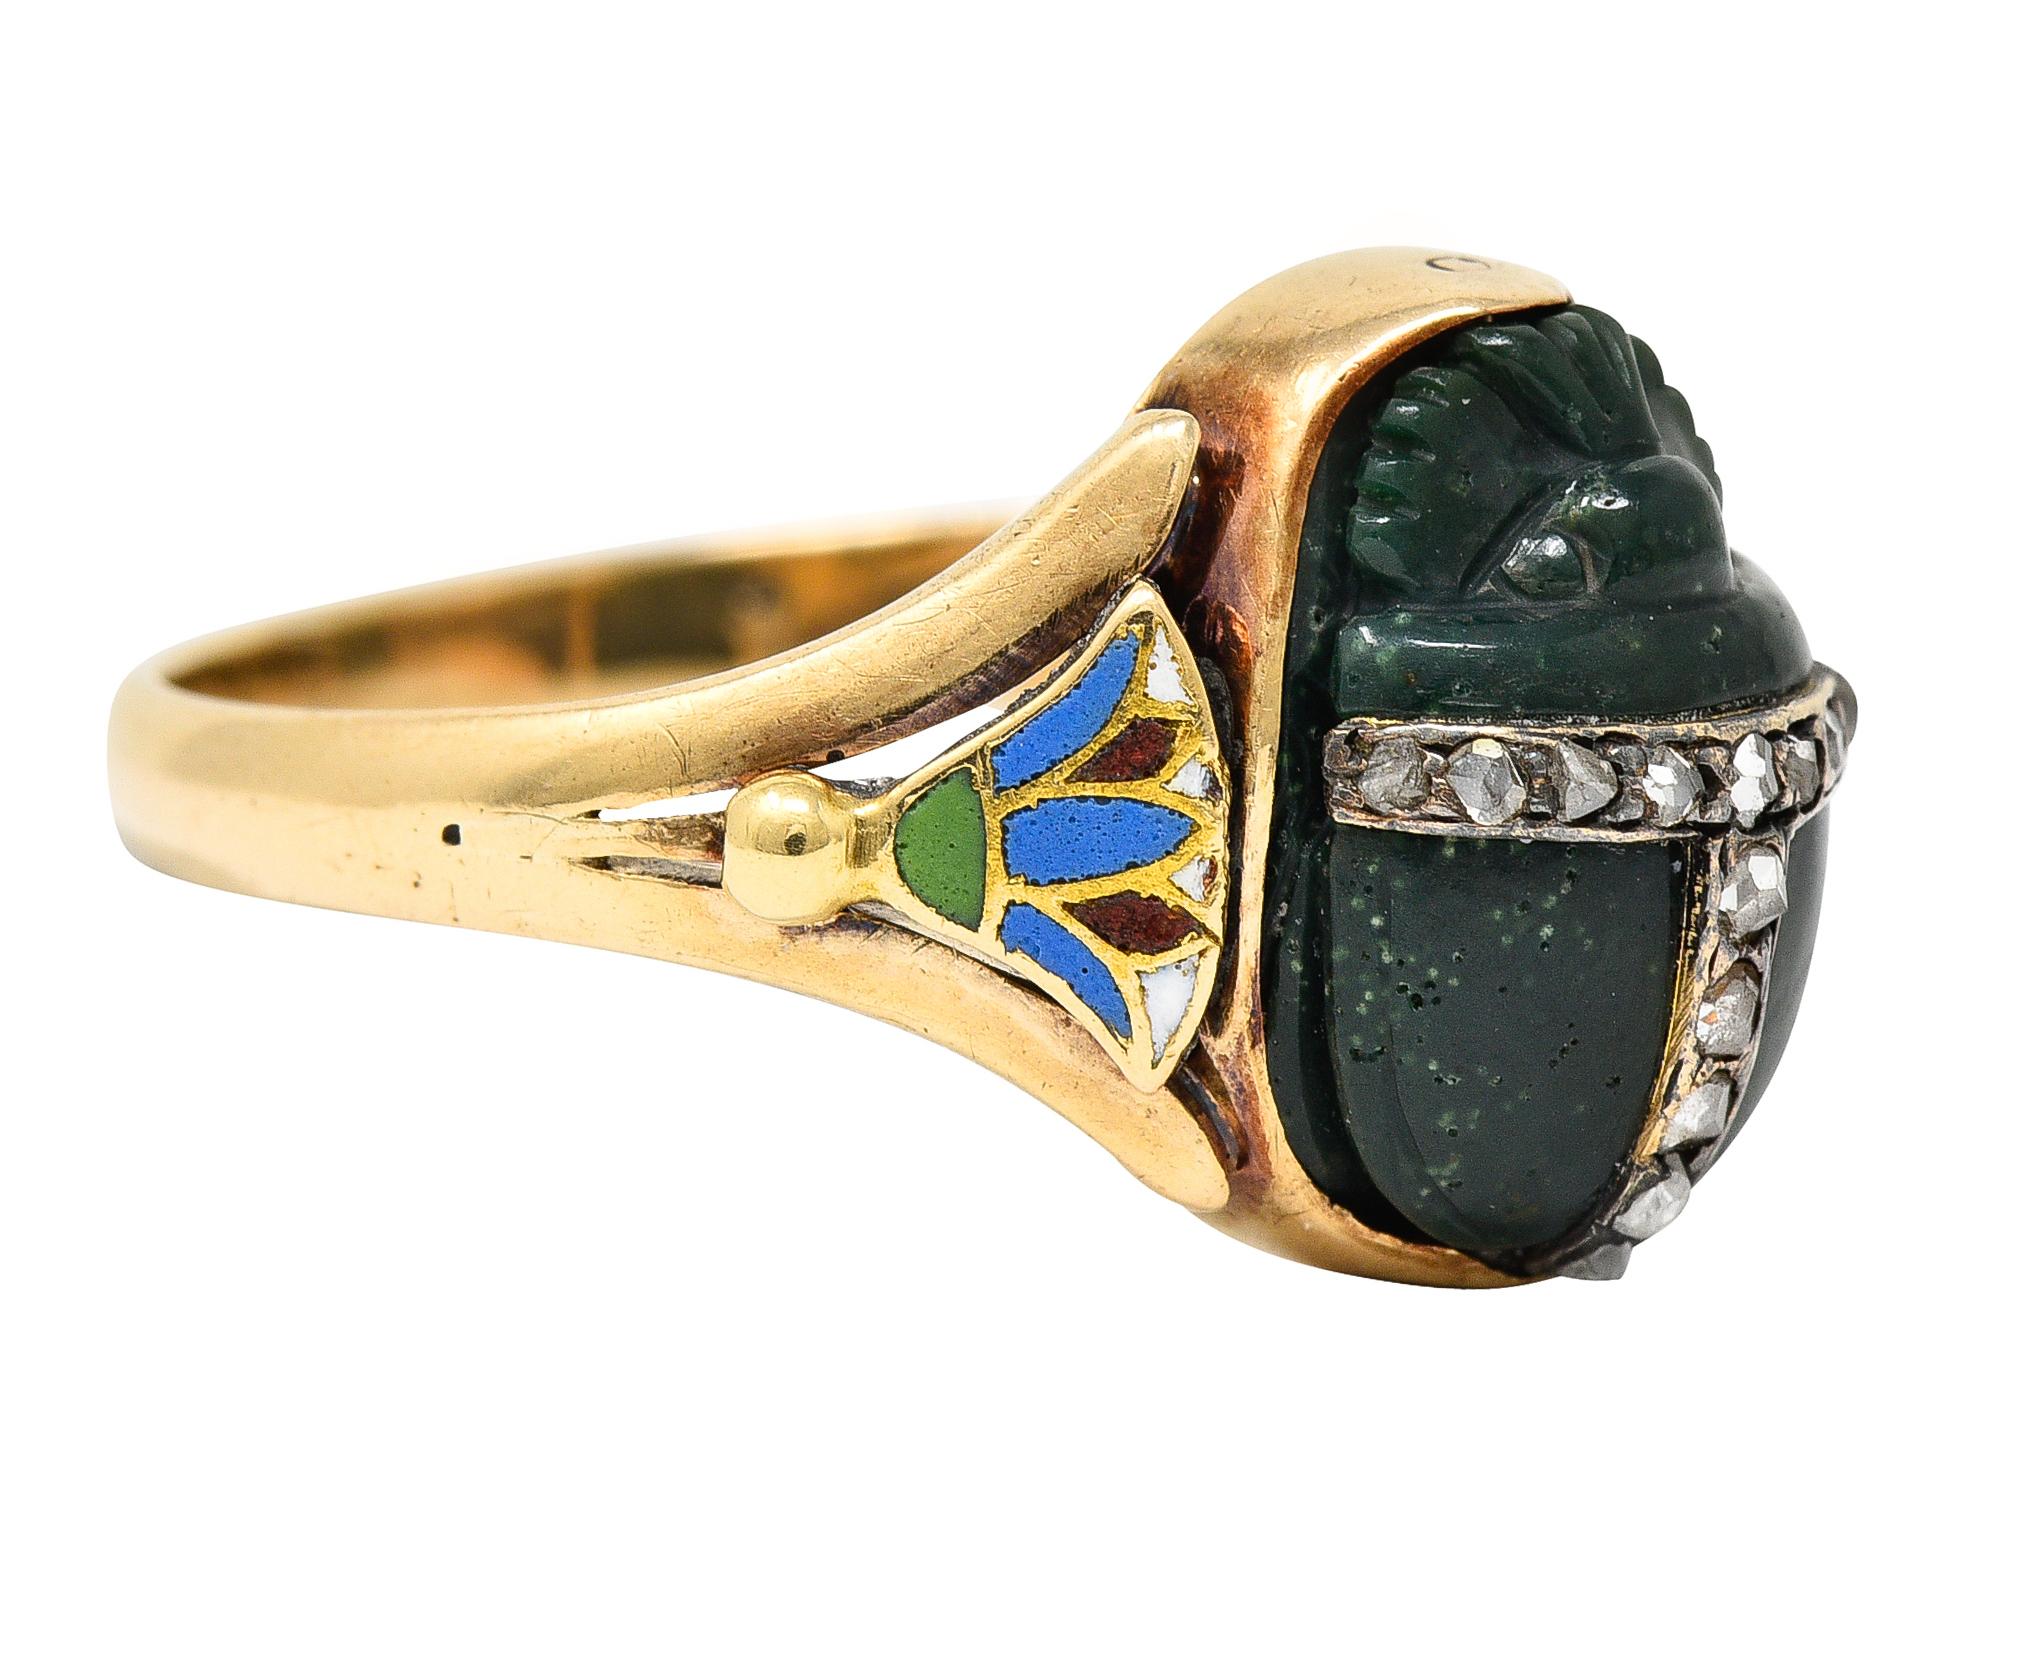 Centering a nephrite cabochon carved to depict a scarab beetle - measuring 9.0 x 12.0 mm. Opaque dark bluish green in color - accented by bands of rose cut diamonds across beetle. Bead set and weighing approximately 0.14 carat total - eye clean and